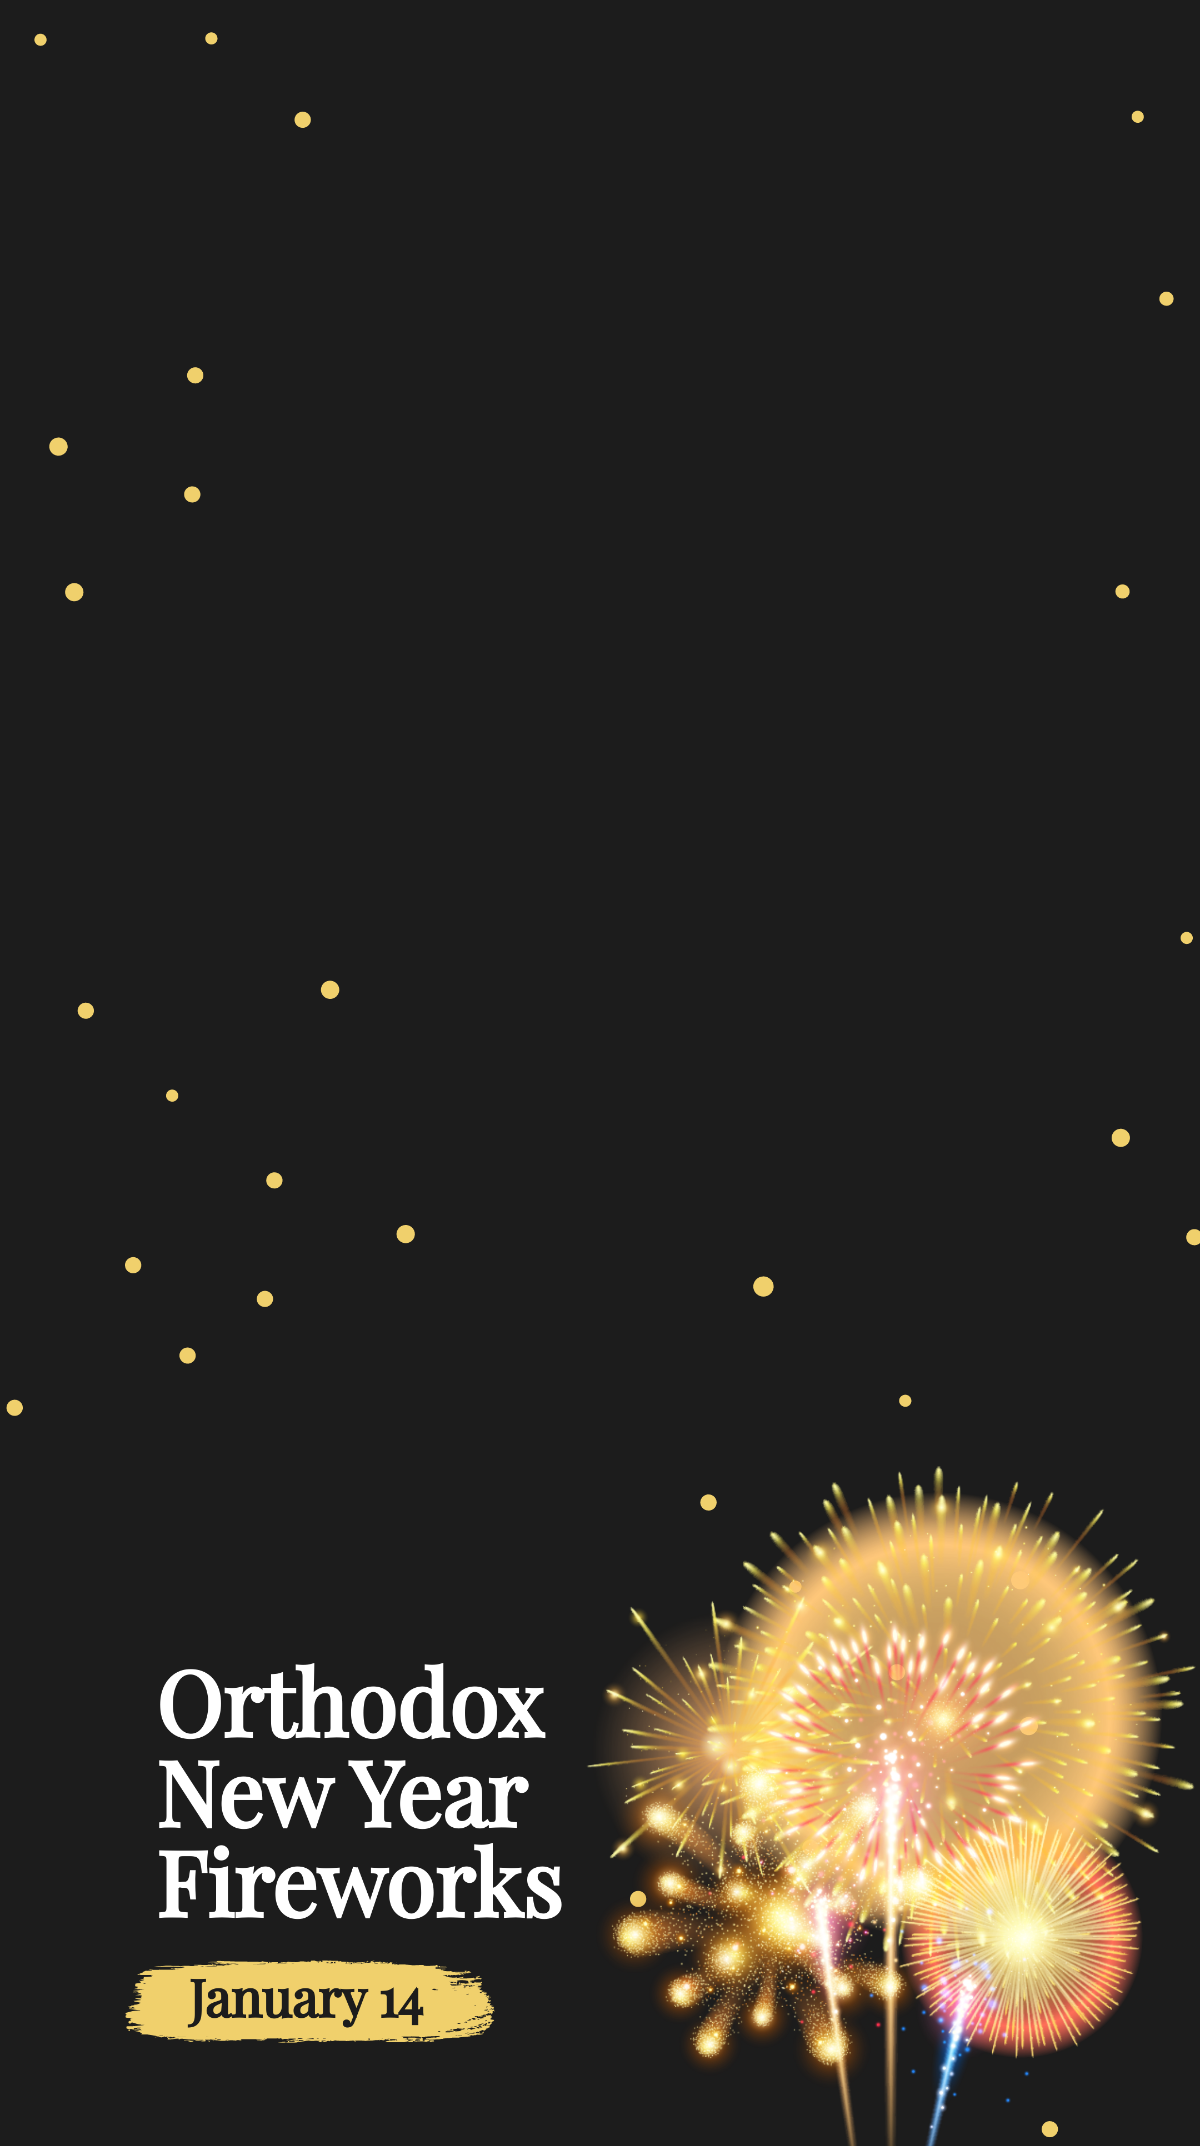 Free Orthodox New Year Fireworks Snapchat Geofilter Template